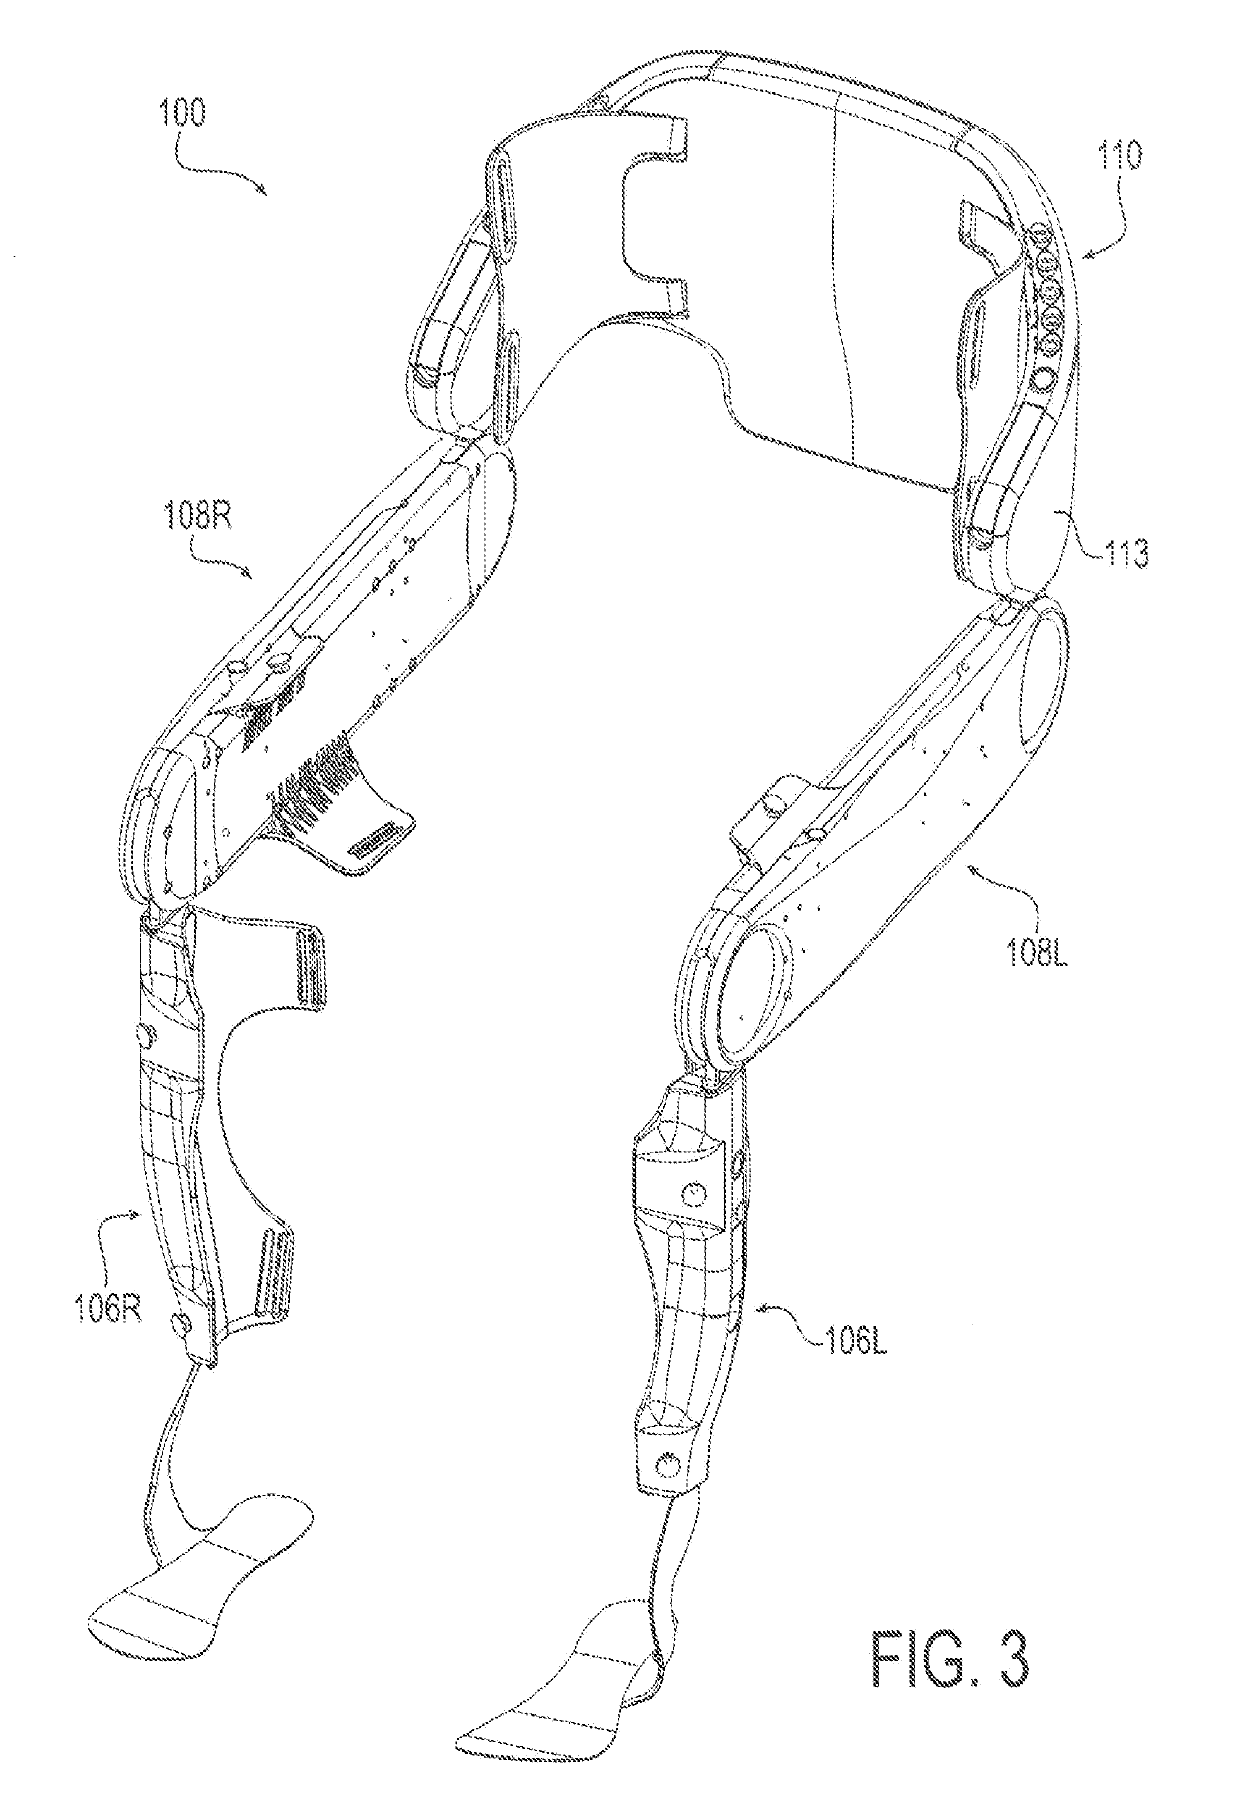 Safety monitoring and control system and methods for a legged mobility exoskeleton device